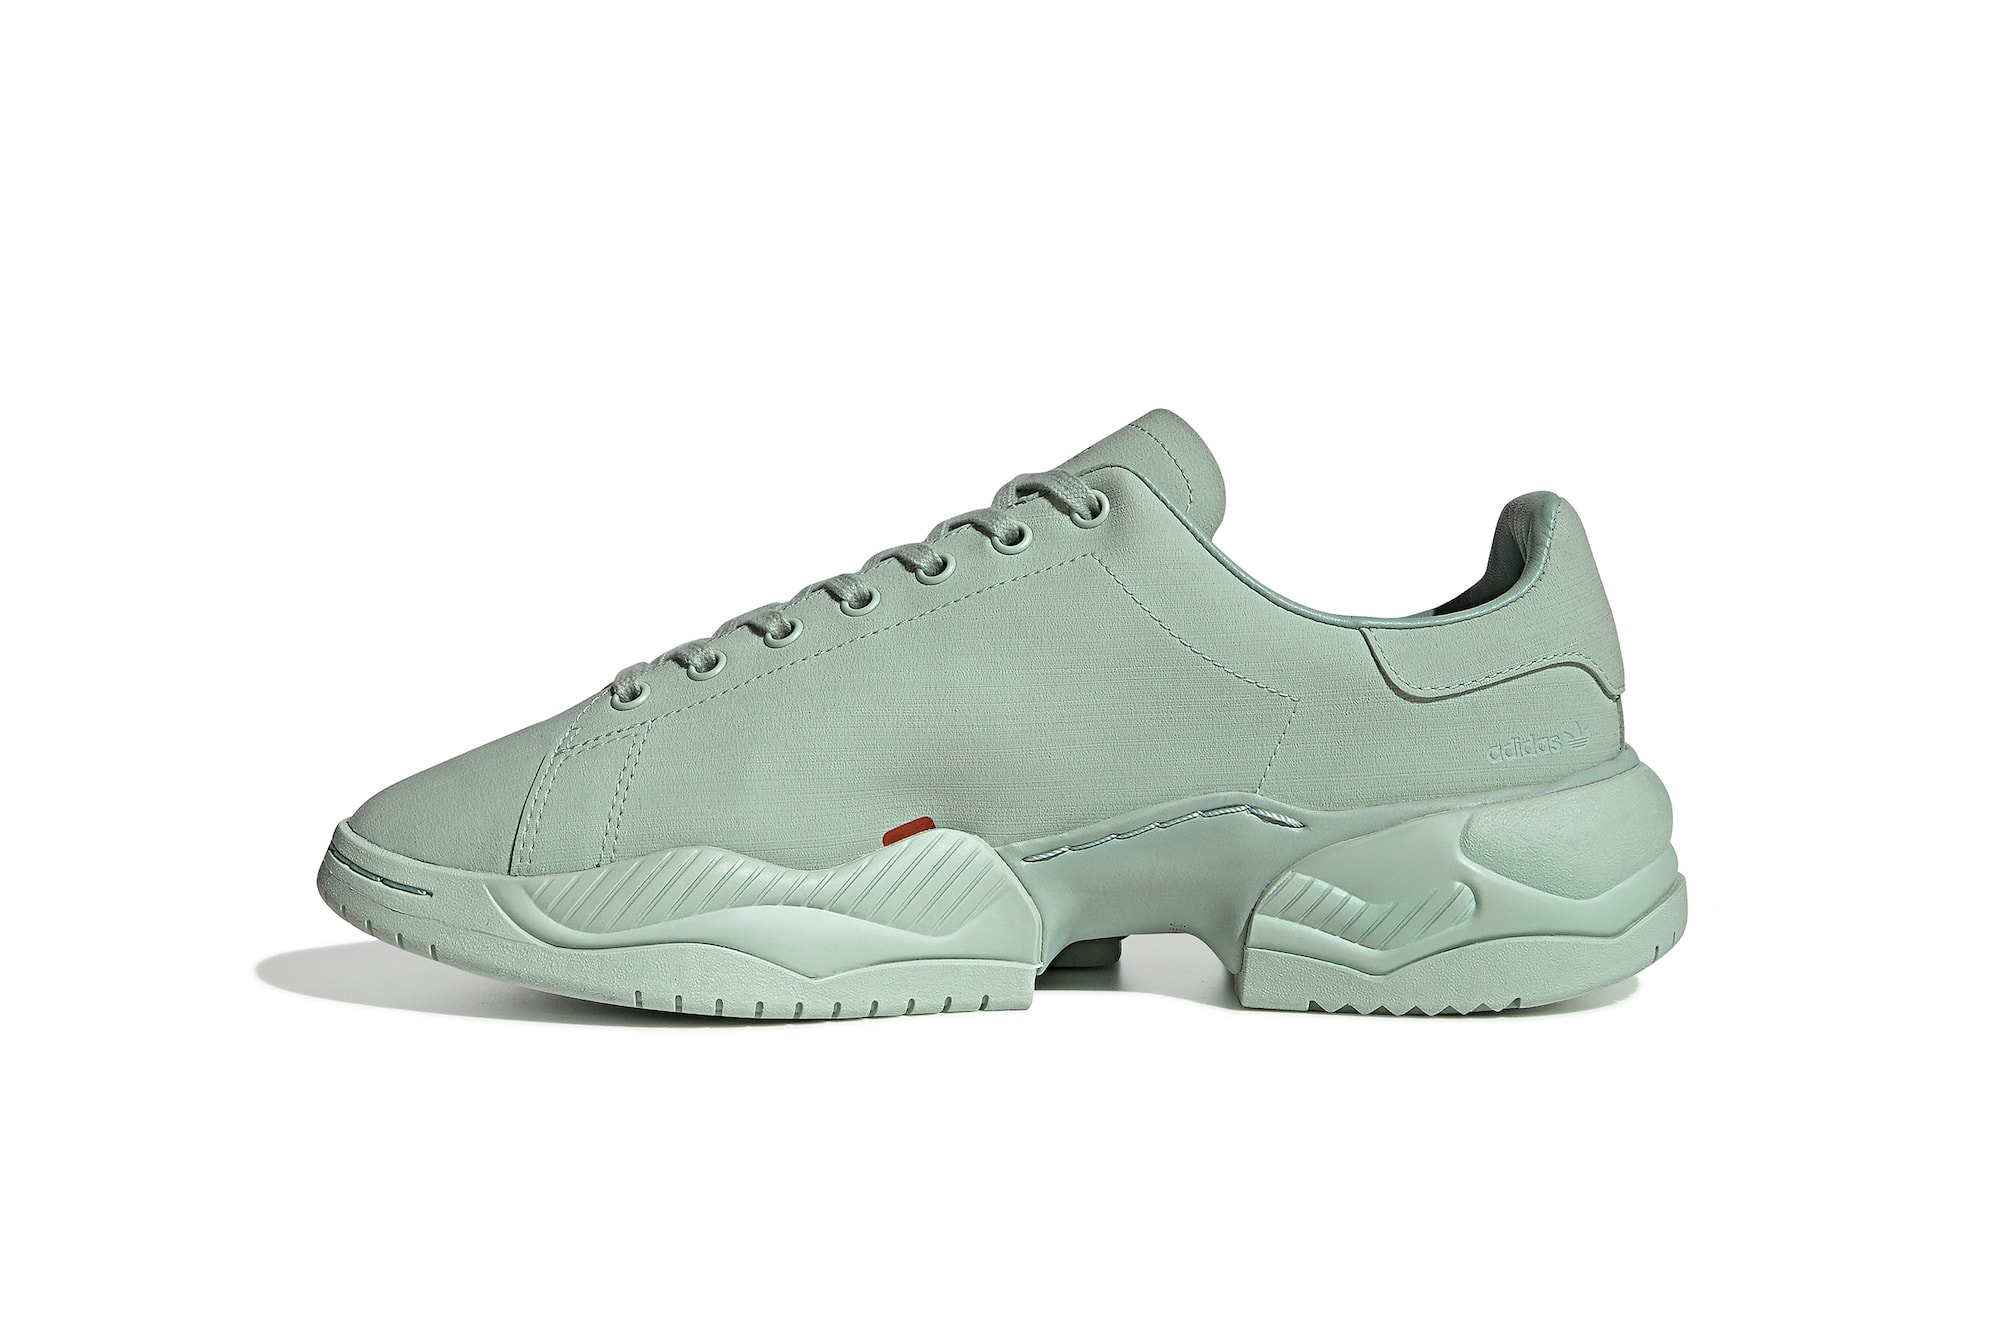 OAMC x adidas Originals Type O-2 Sneaker Release Mint Green White Cream Black Color Chunky Sole Minimal Trainer Shoe Footwear 